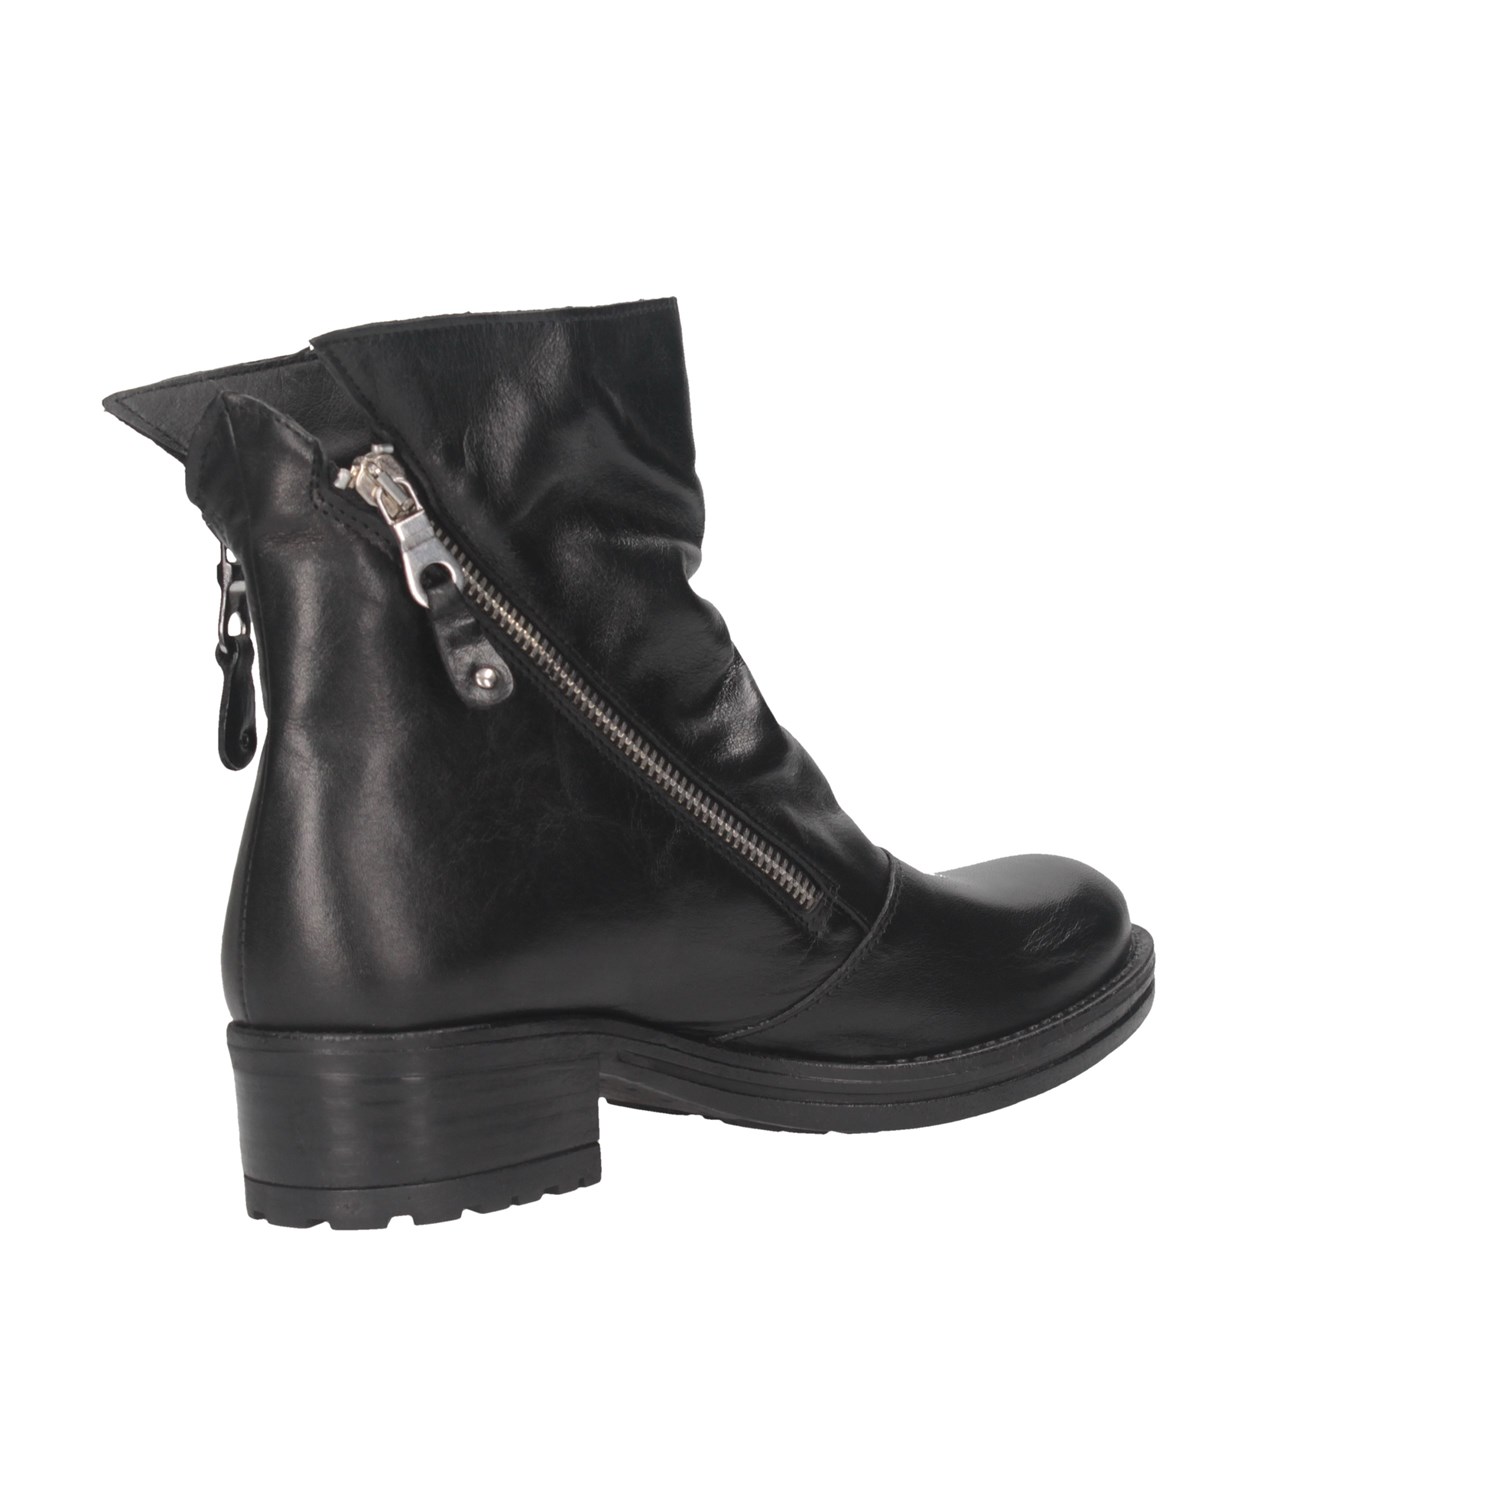 Made In Italy 6 BIKER ALTO Black Shoes Woman 